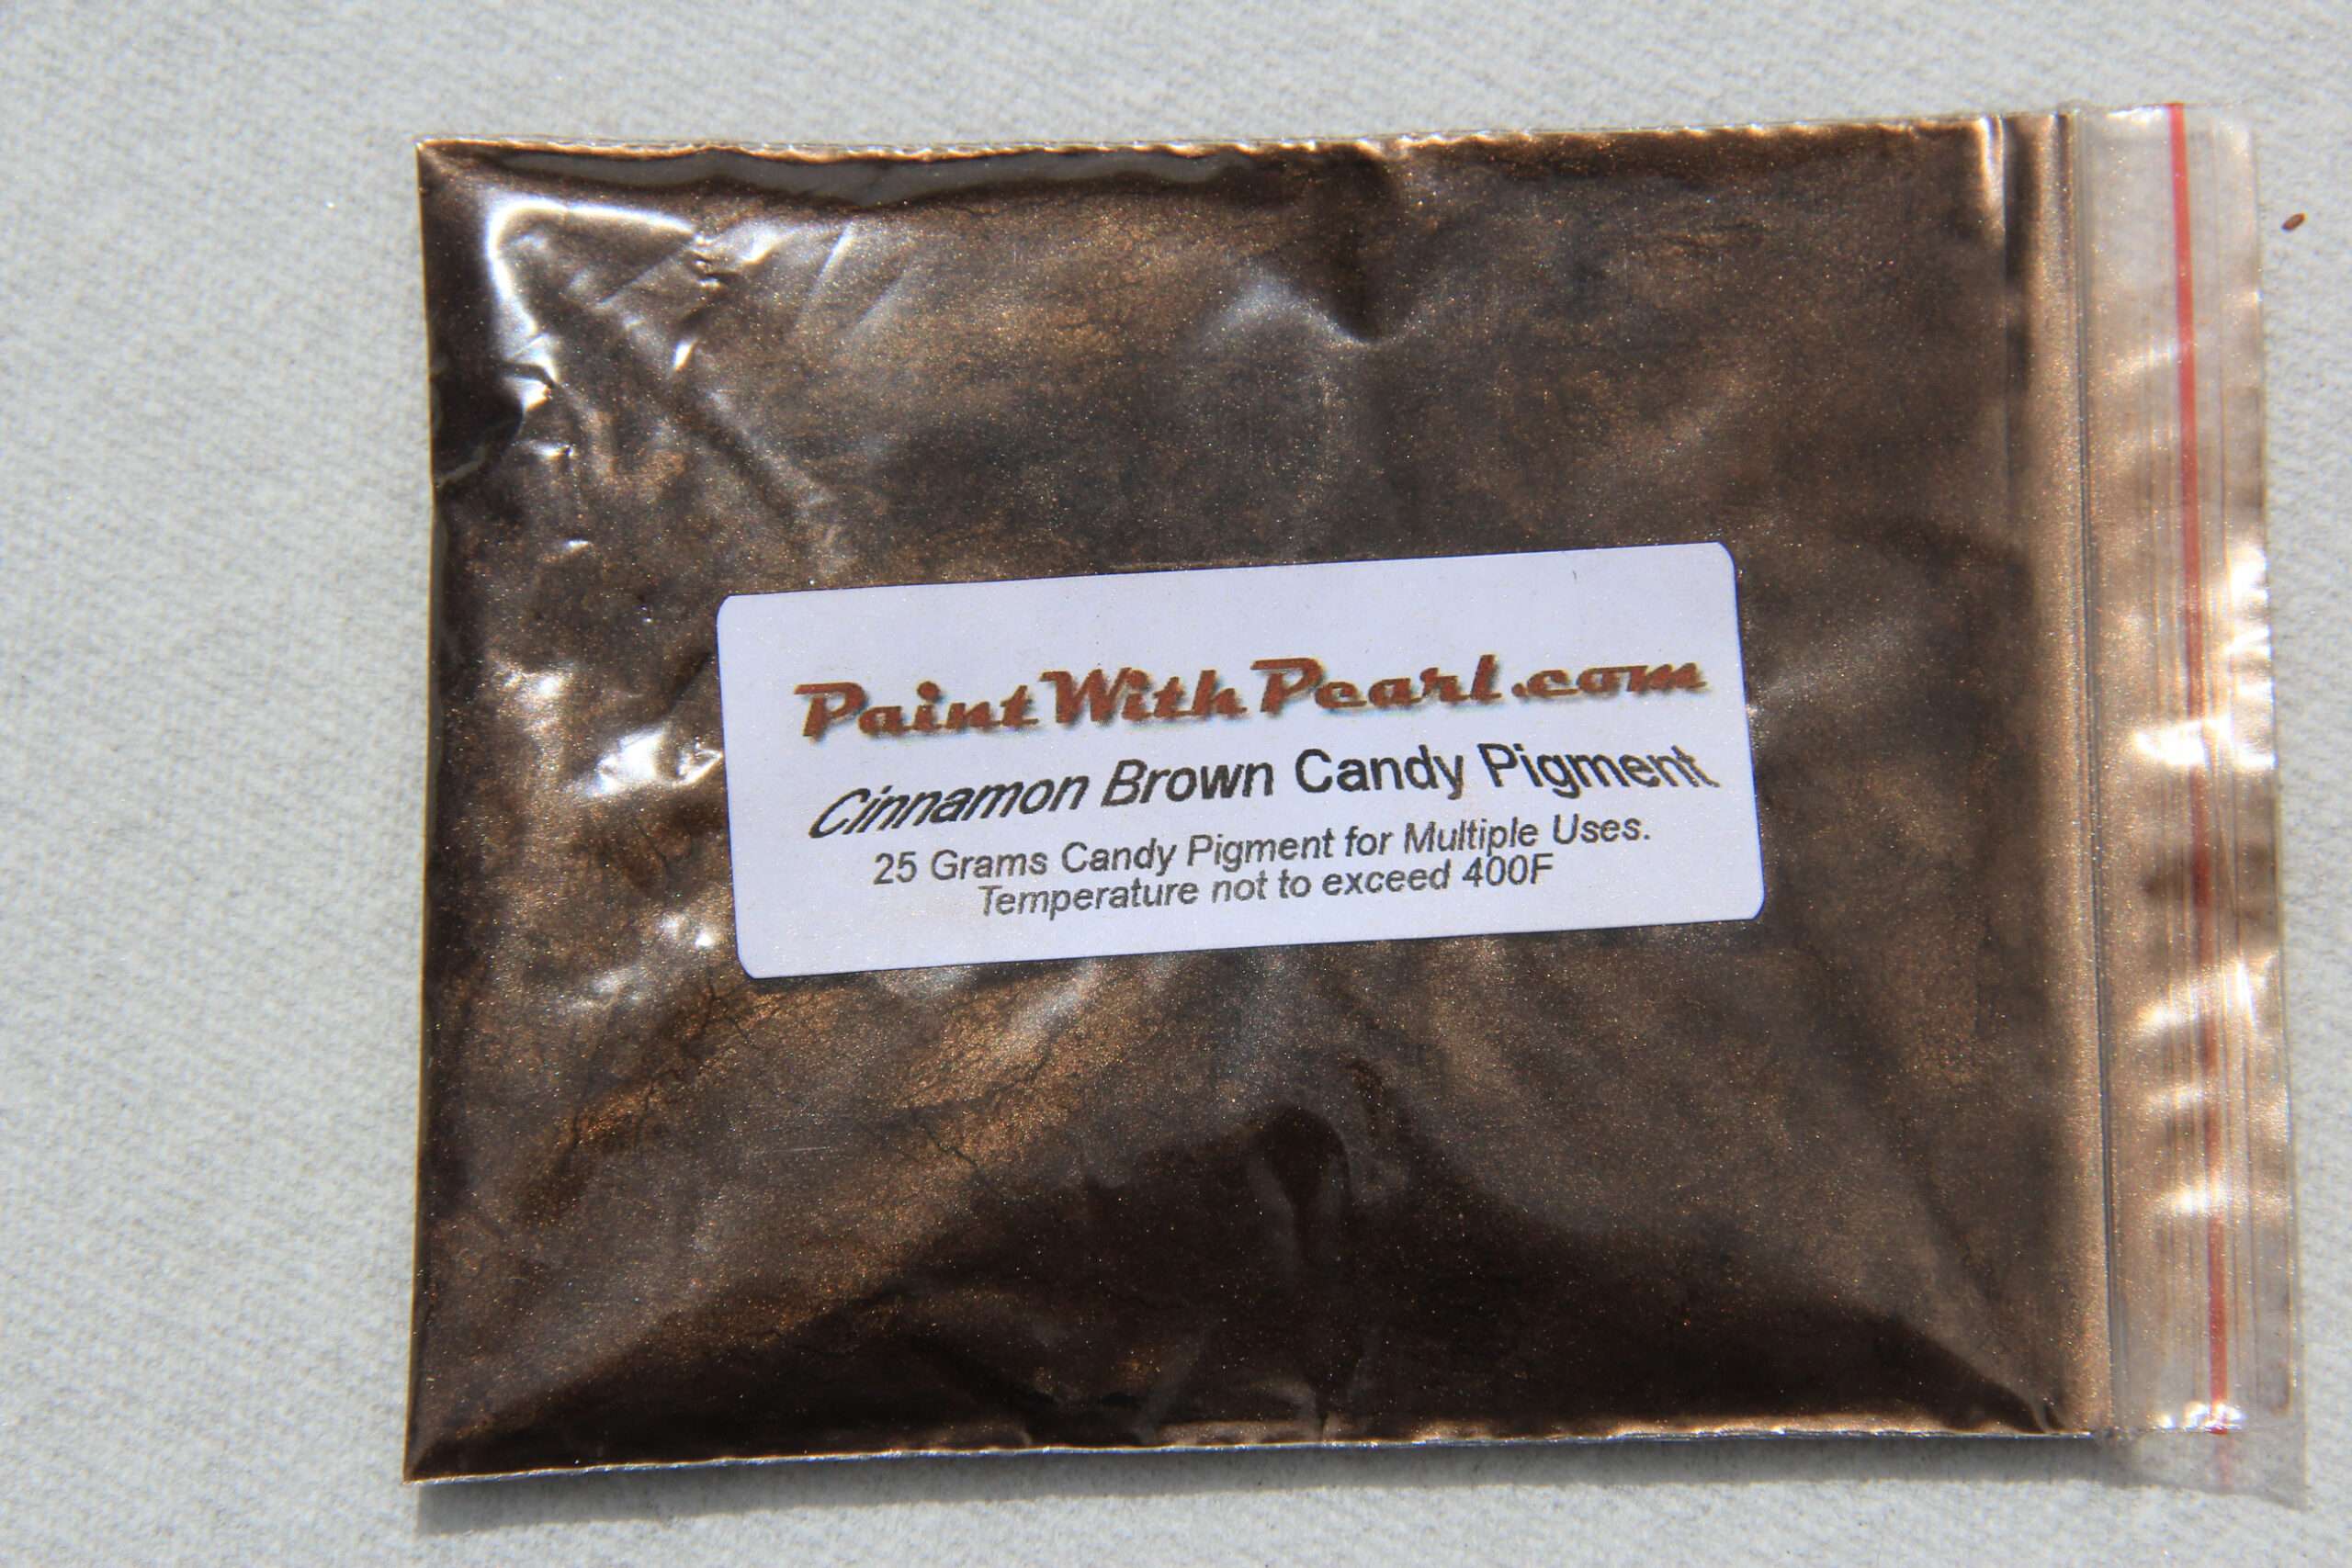 25 Gram Bag of Cinnamon Brown Kandy Paint Pearl for Kustom Paint, Powder coat, or any other coatings.